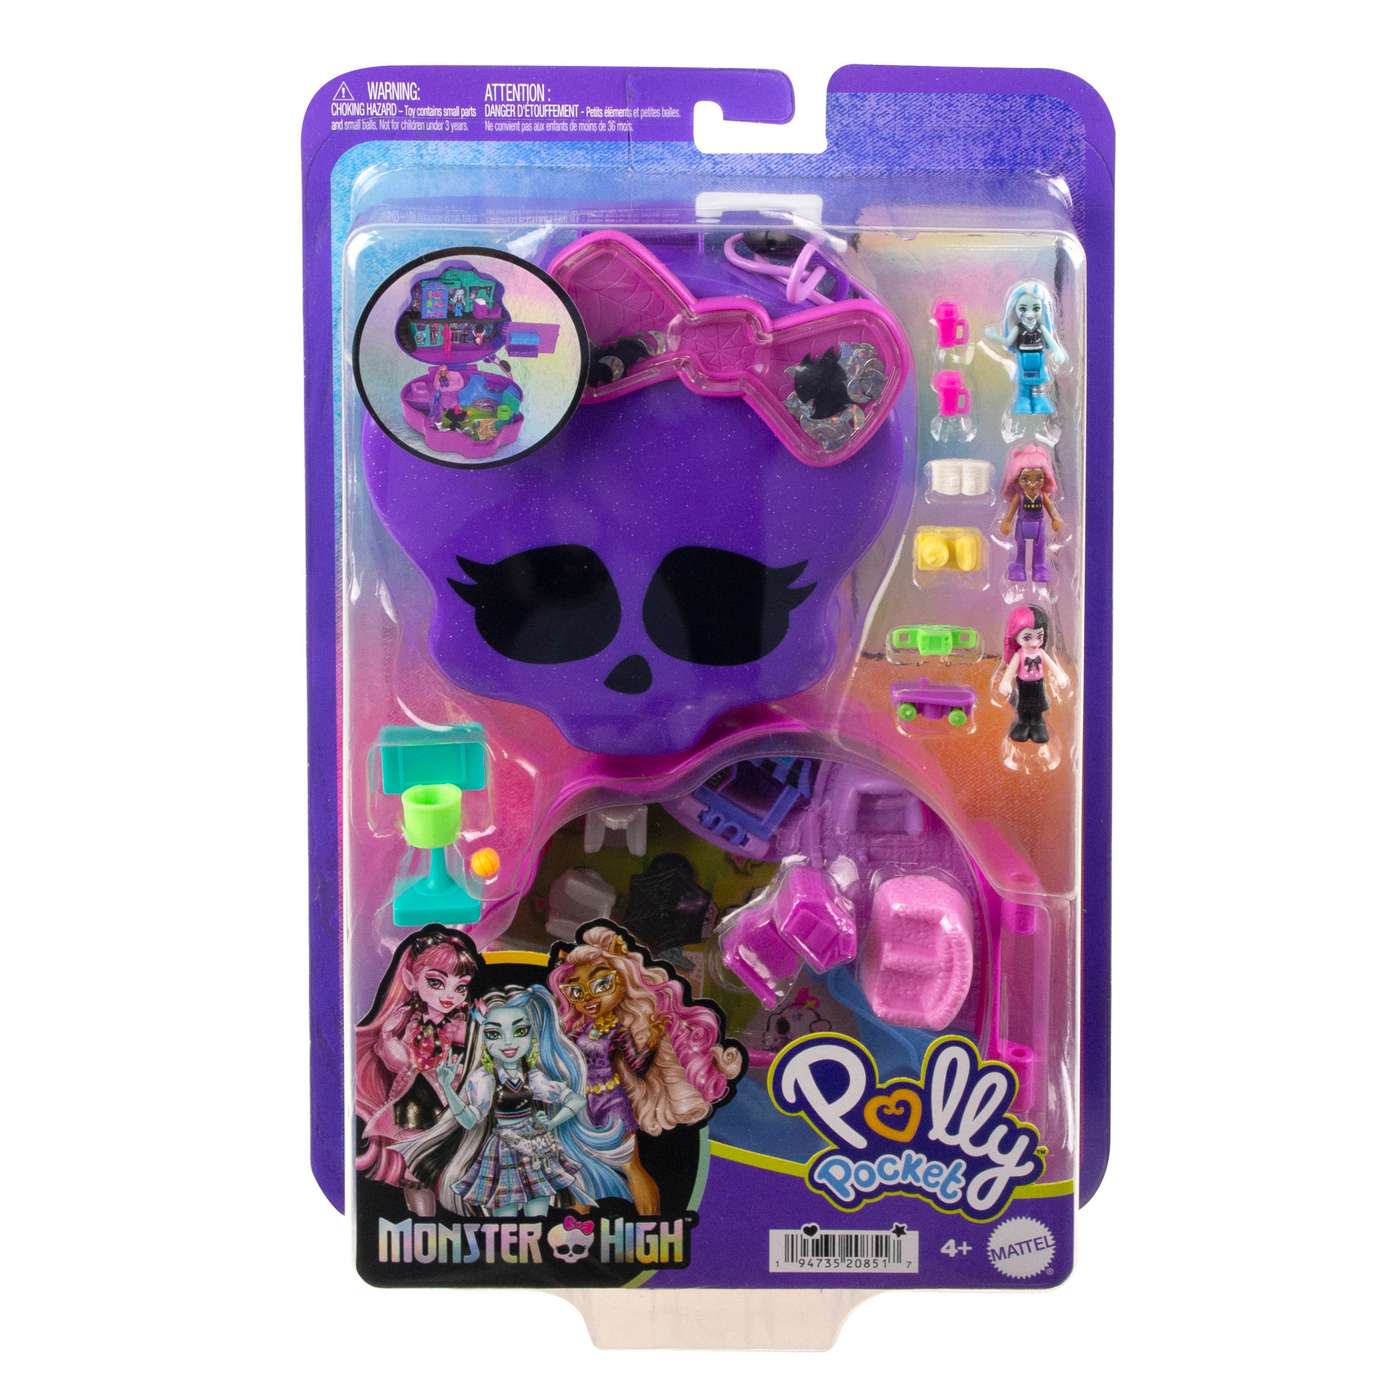 Polly Pocket Monster High Compact Playset; image 1 of 3